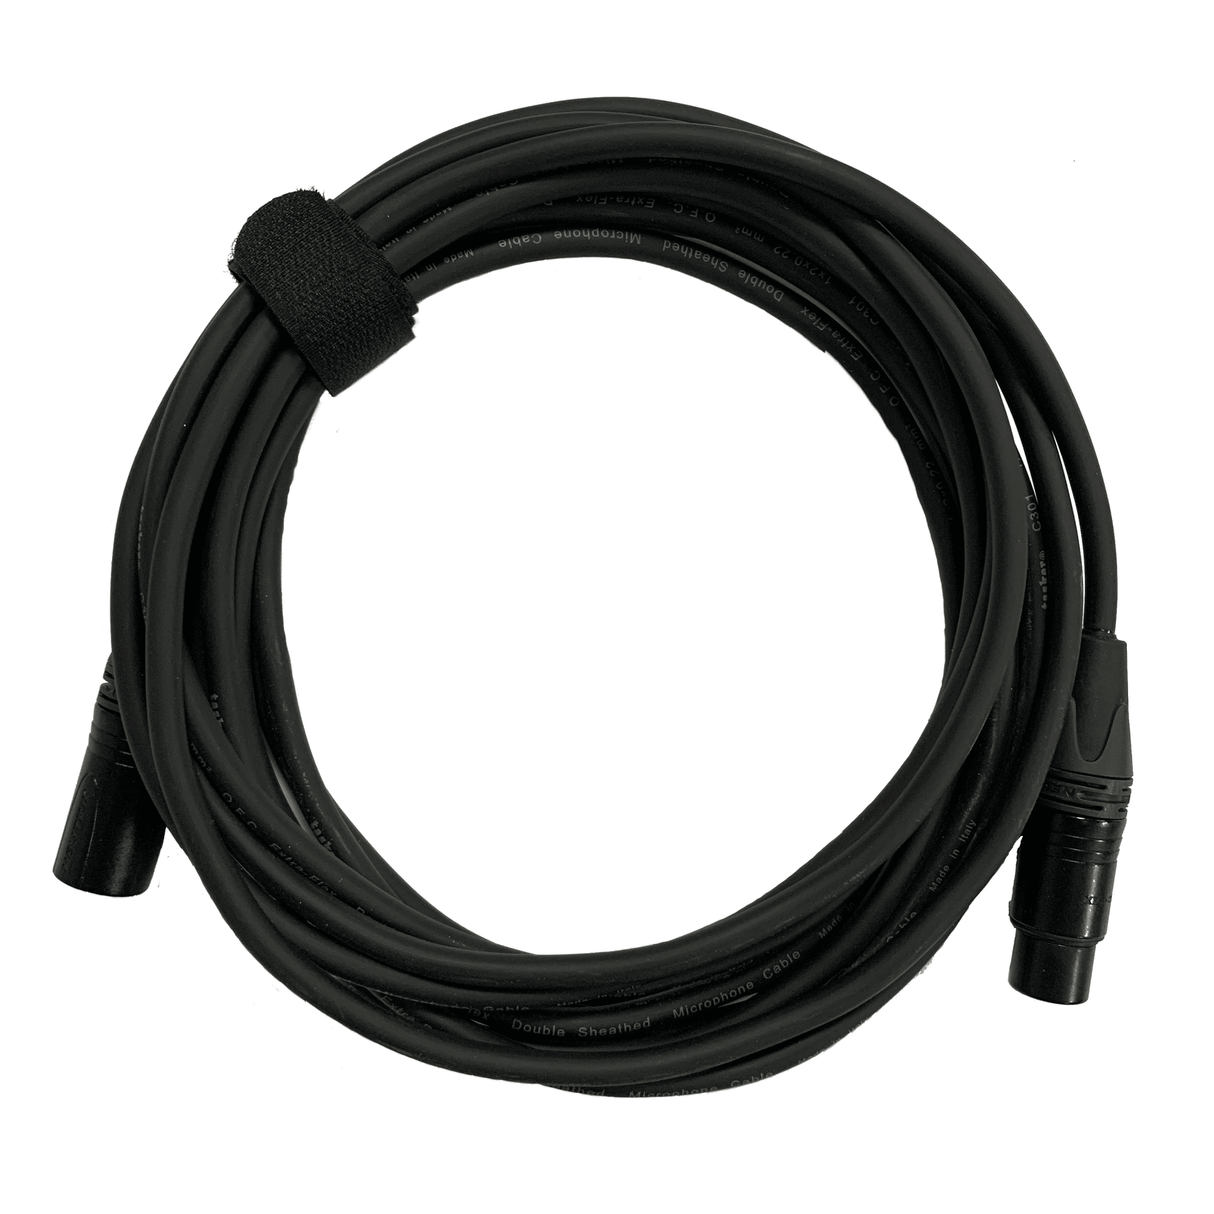 Rough Cable's XLR Cable A+ kwaliteit | 5 Meter